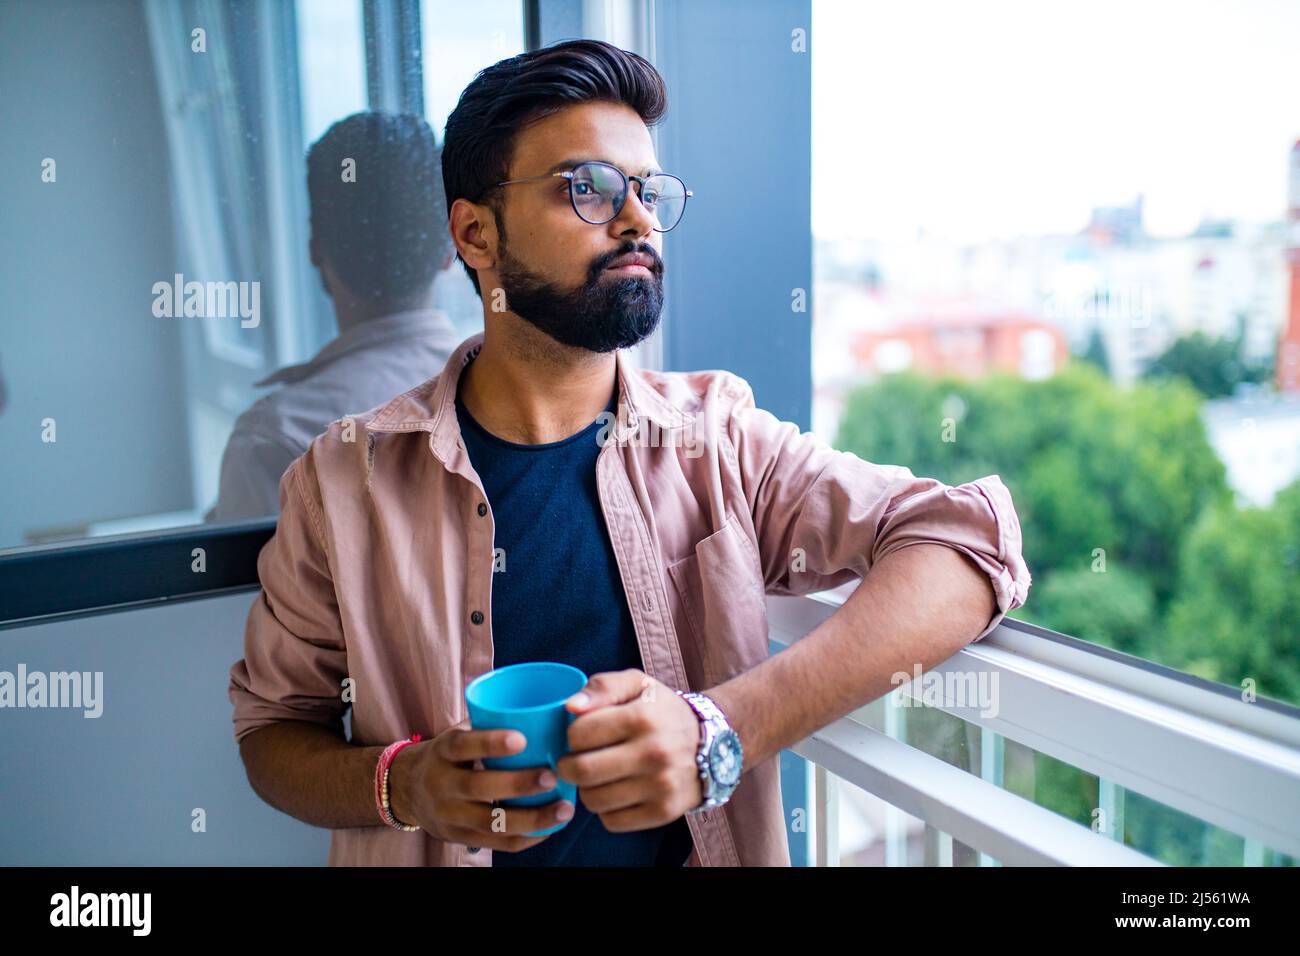 arabian man in casual dress holning a blue cup and looking dreamly Stock Photo